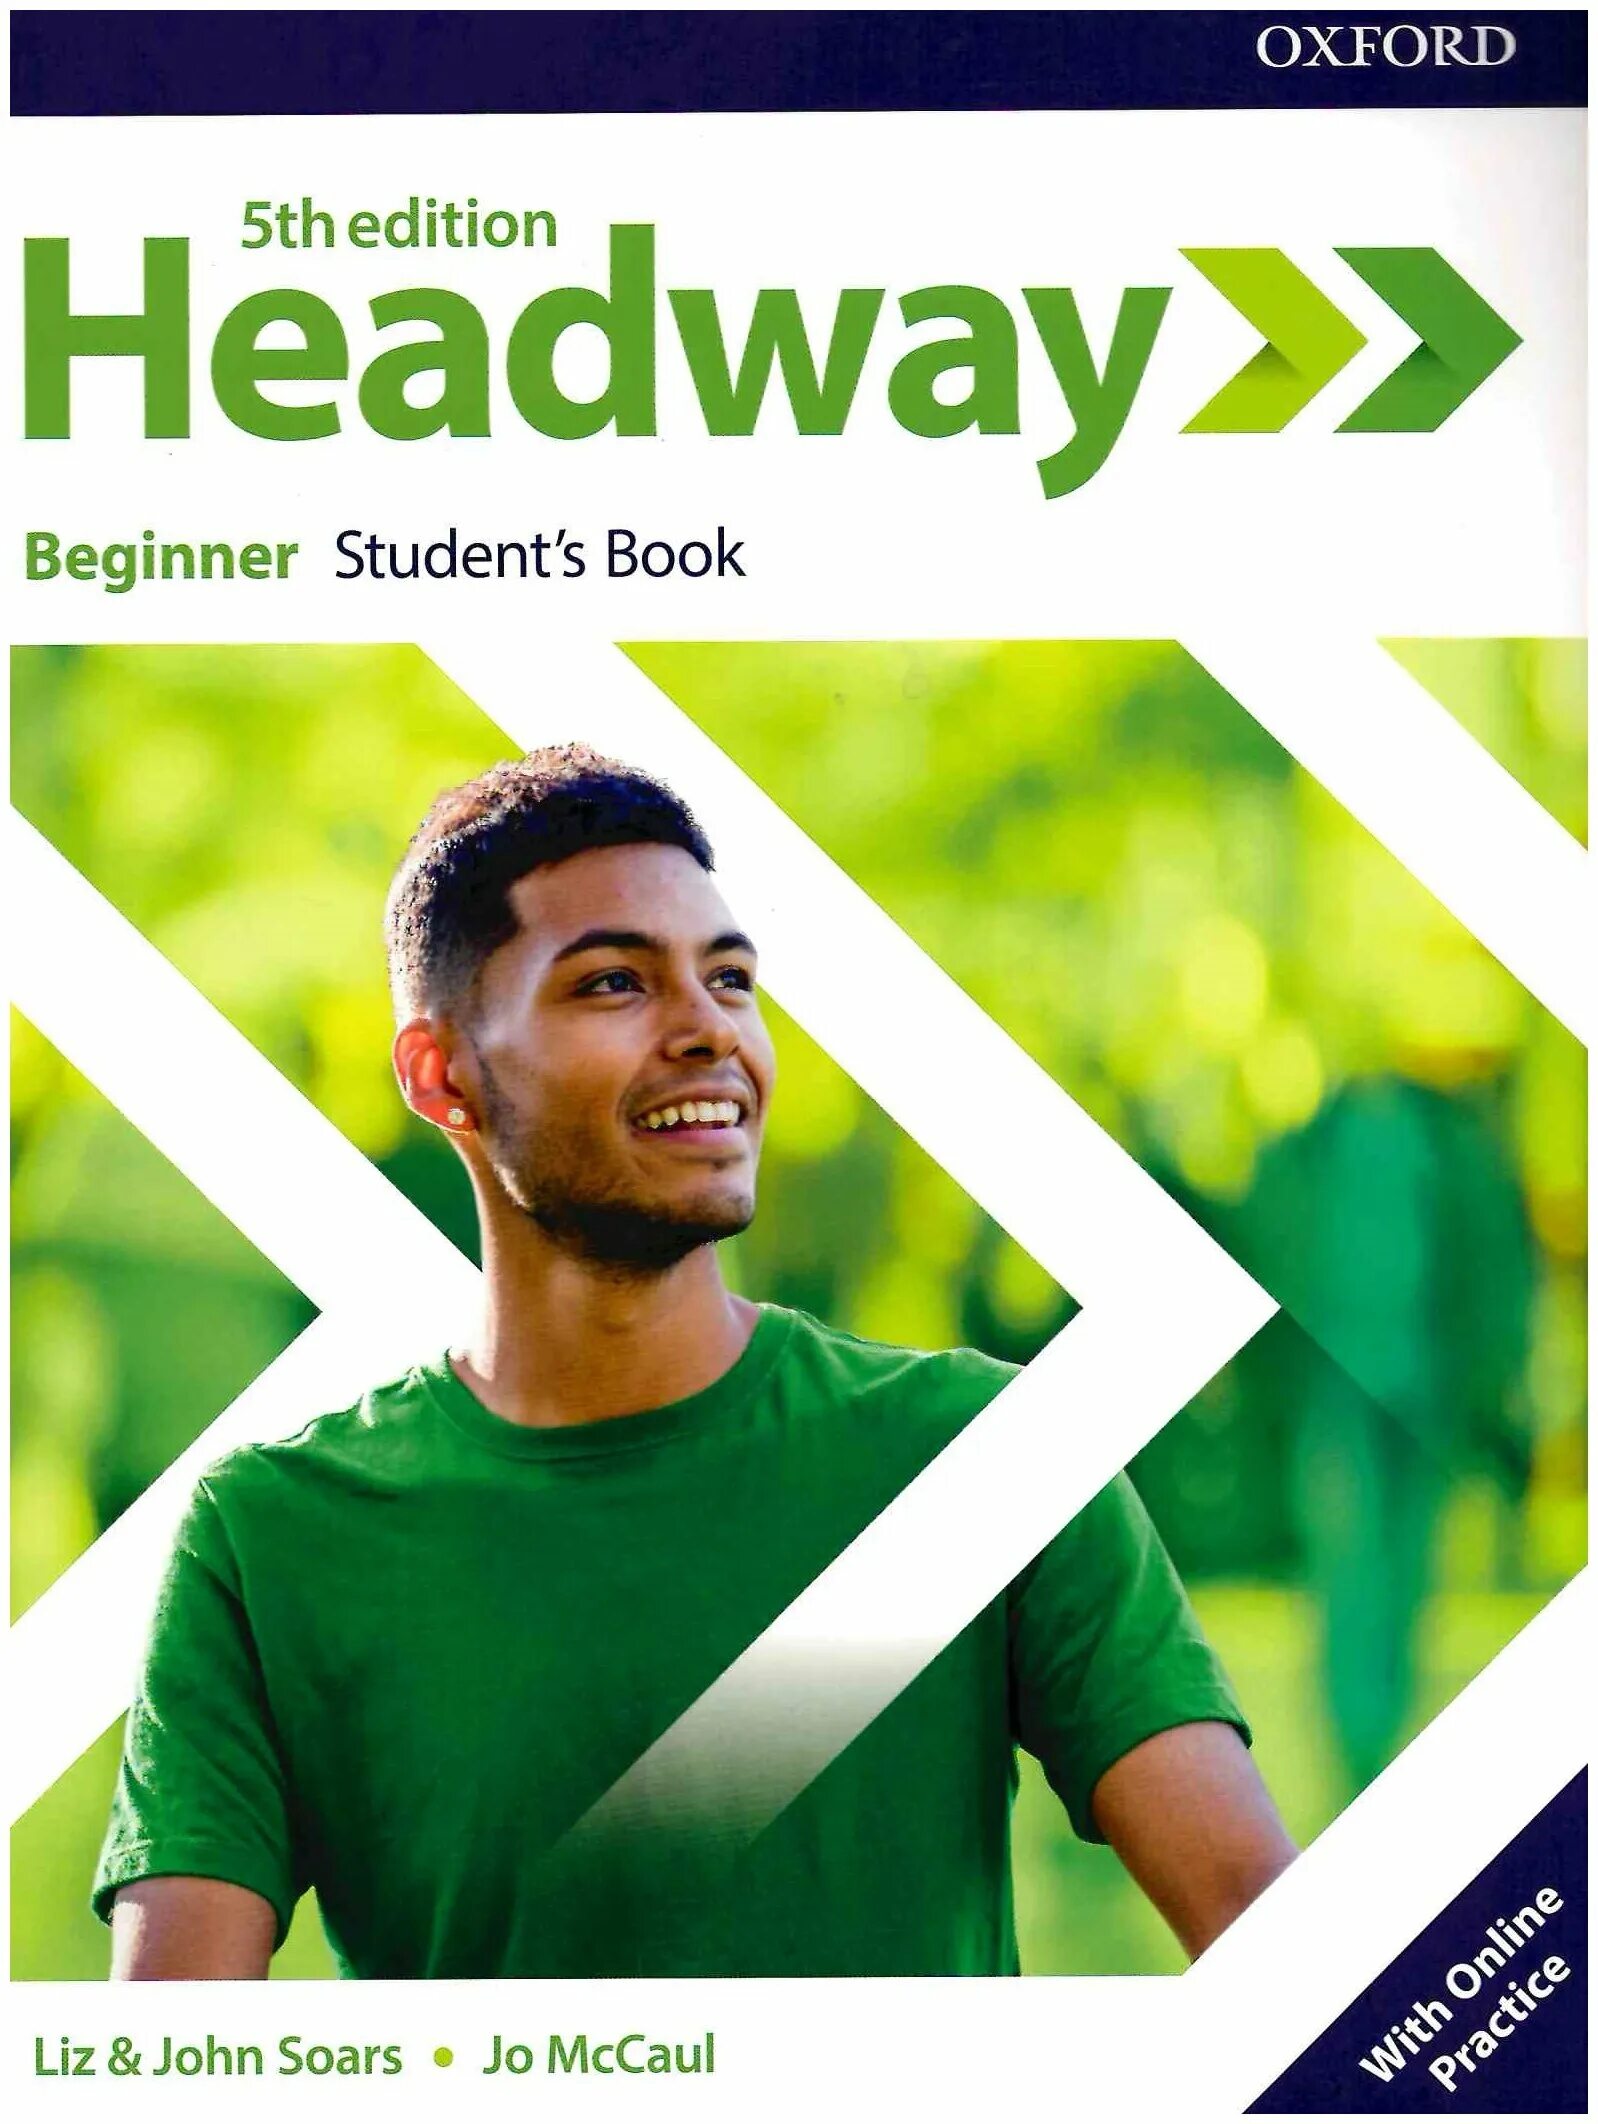 Headway Beginner 5th Edition book Cover. New Headway Beginner student's book 5th Edition. New Headway Beginner 5 th students book. New Headway Beginner 5th Edition. Student s book купить